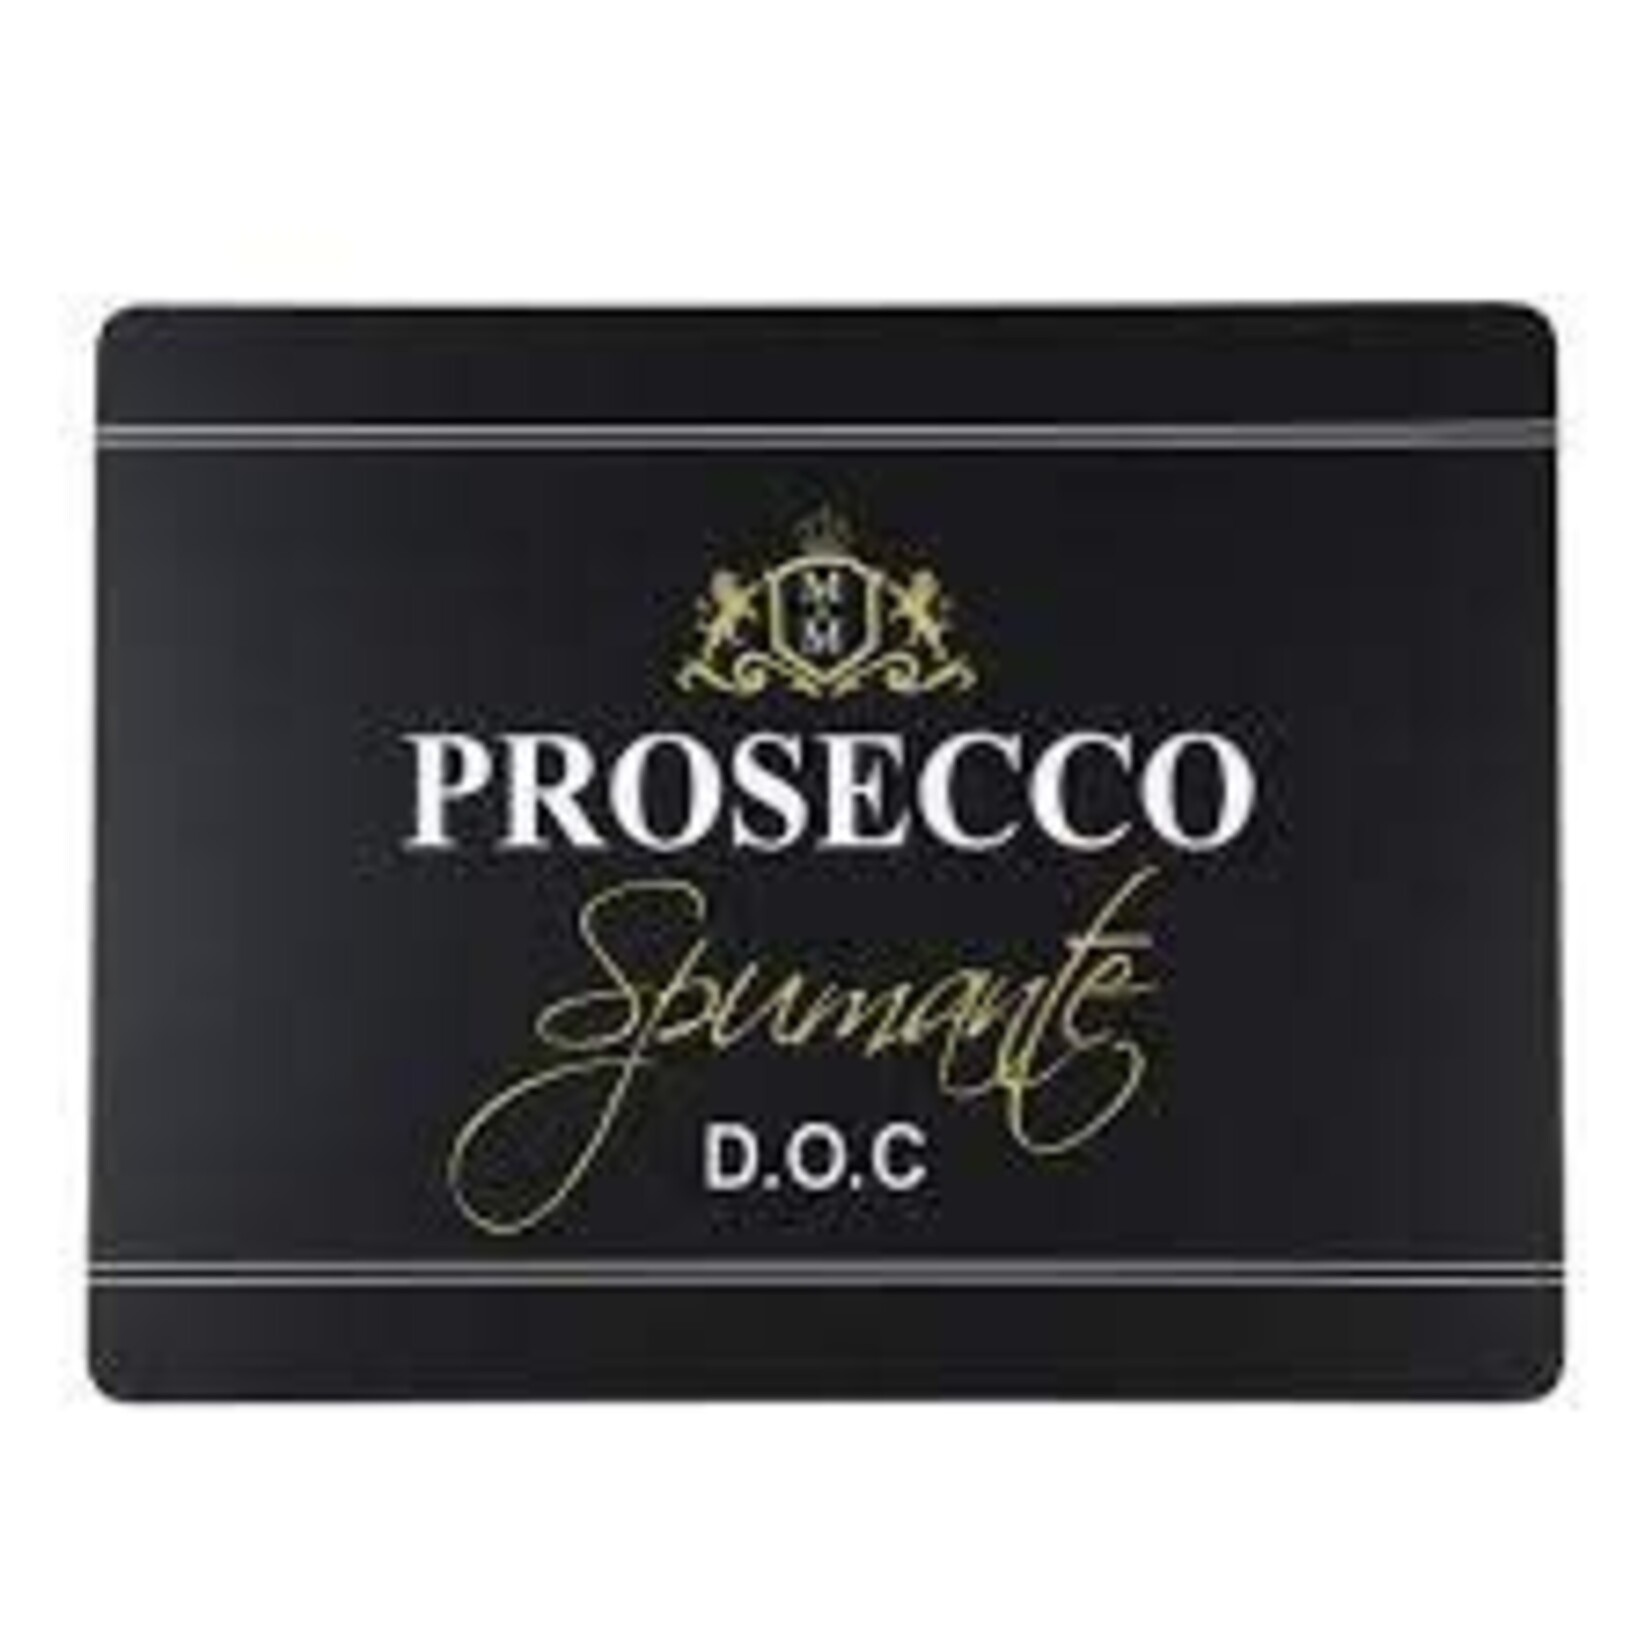 Mars & More Placemats wijn Prosecco set-4 placemats kurk onderlaag Prosecco Mars & More SCPMWPZ